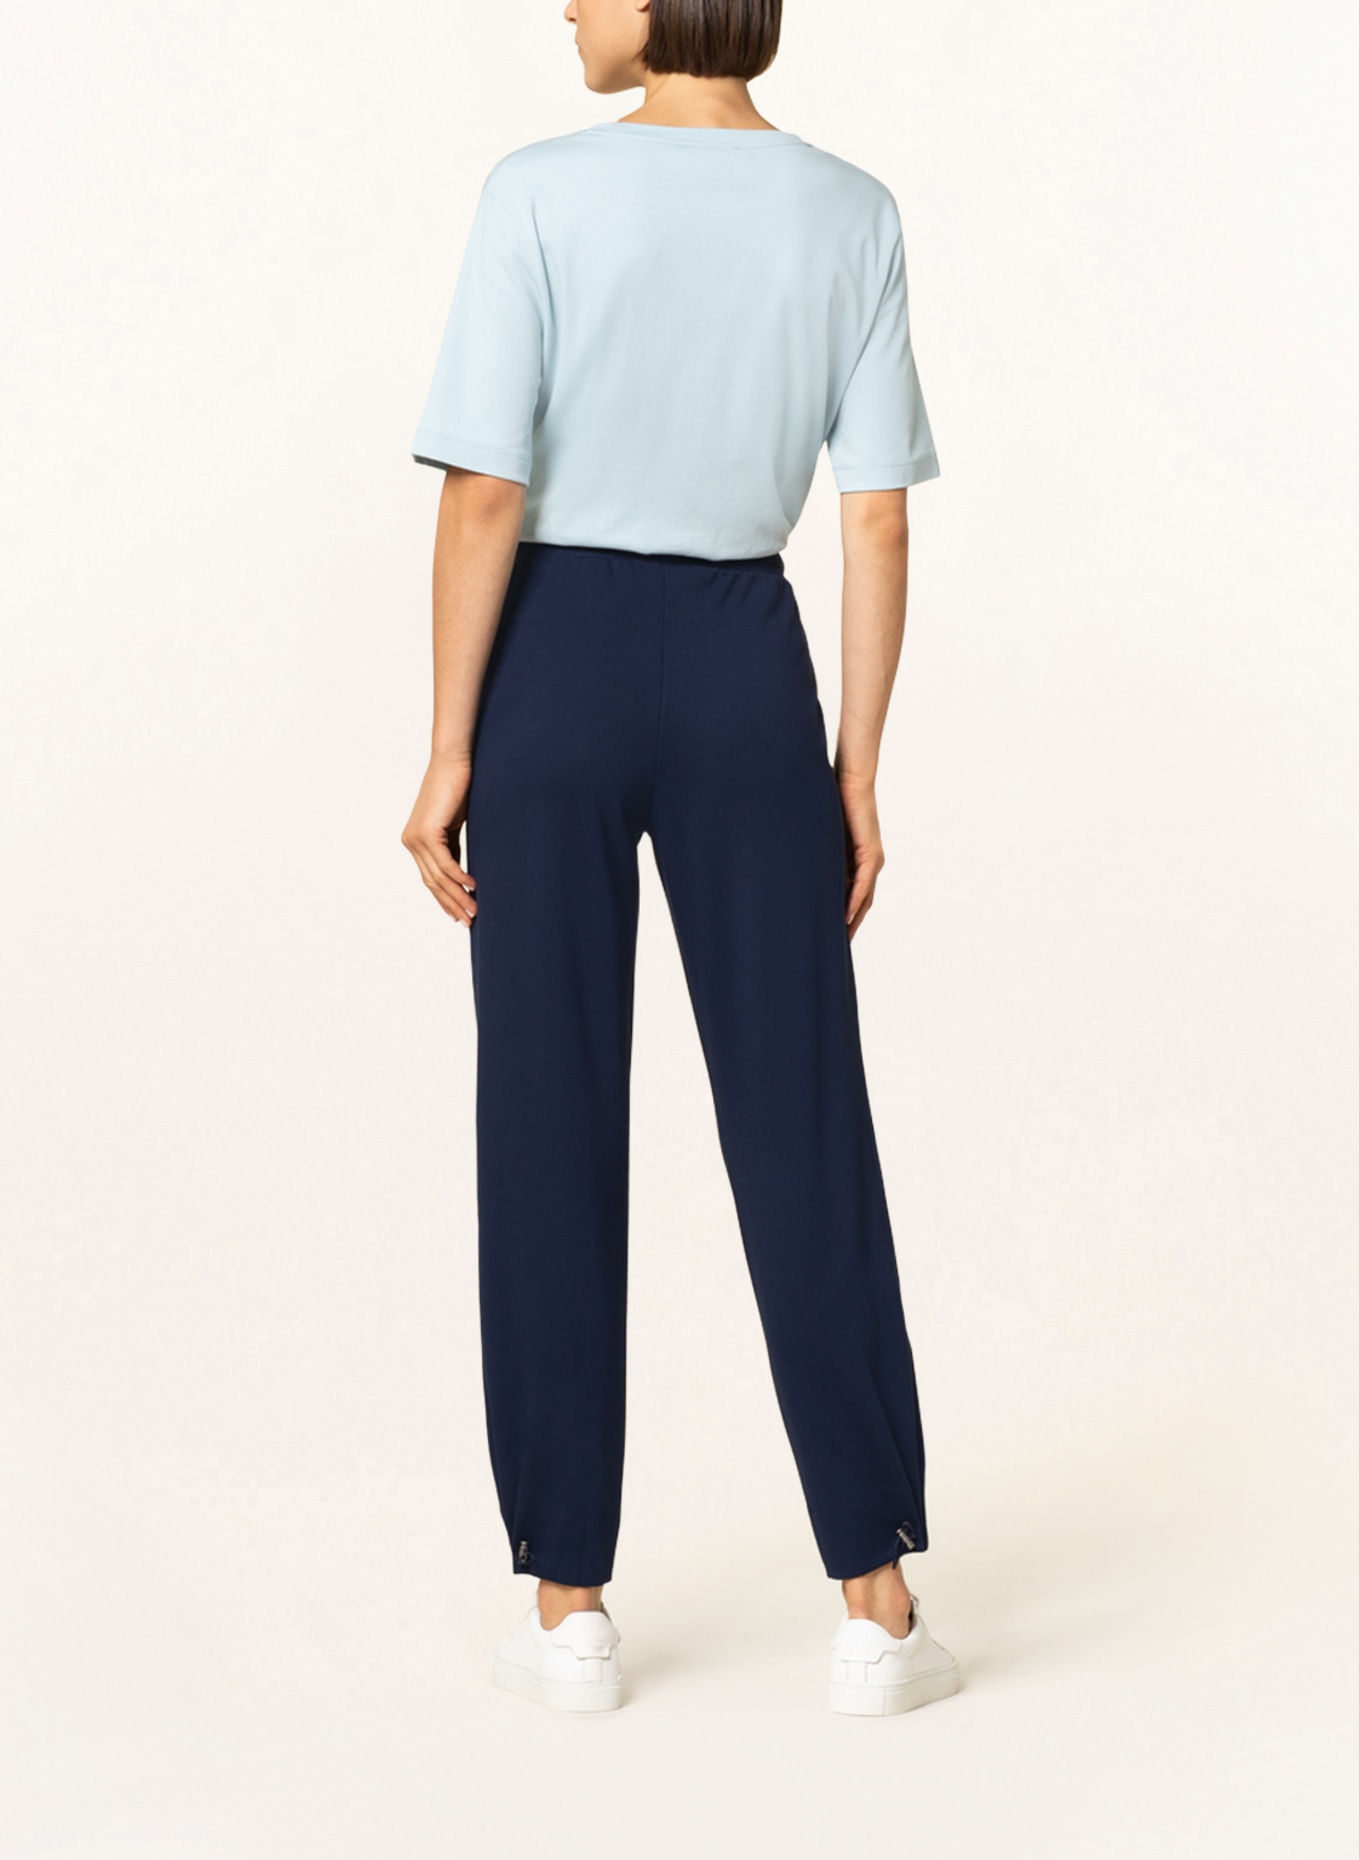 TED BAKER Pants ORTHON in jogger style, Color: DARK BLUE (Image 3)